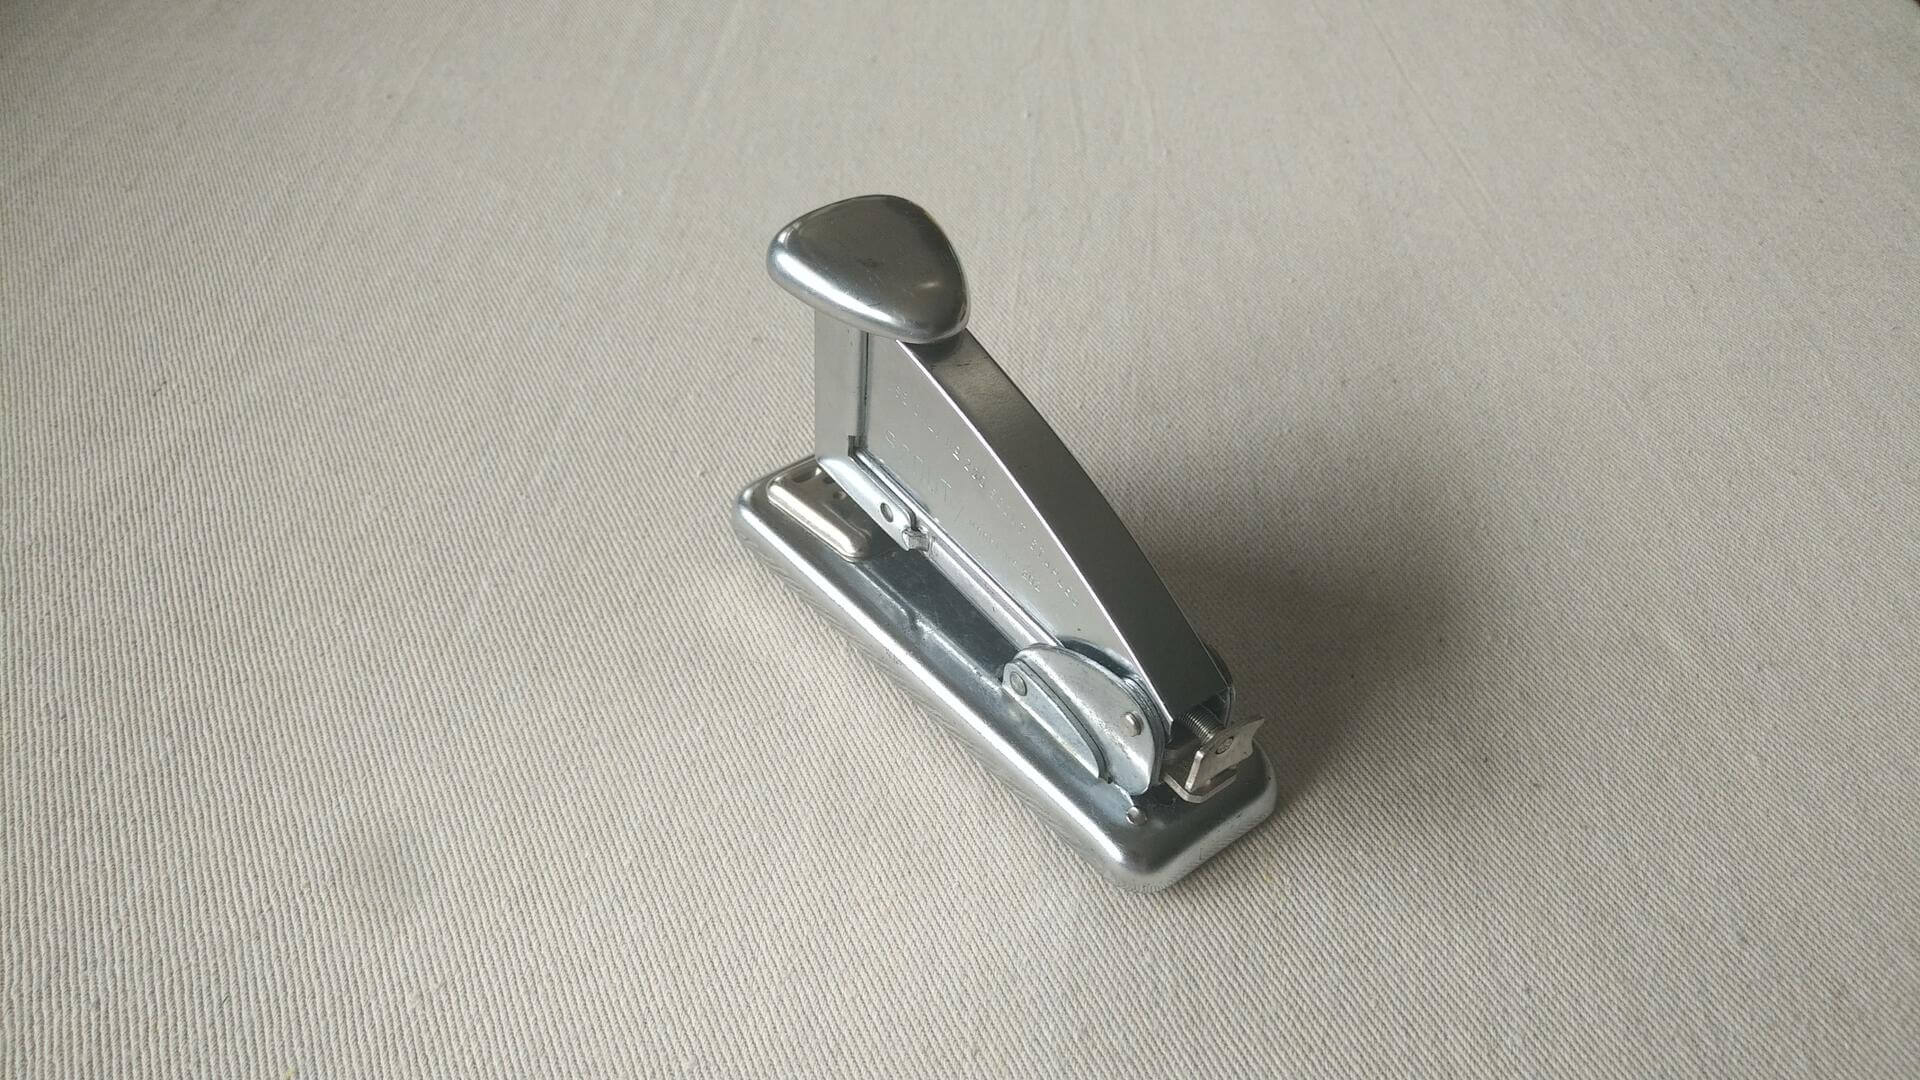 Vintage chrome steel stapler Scout model No. 202 by Ace Fastener Corp. Antique made in USA collectible office equipment and stapling machine stationery